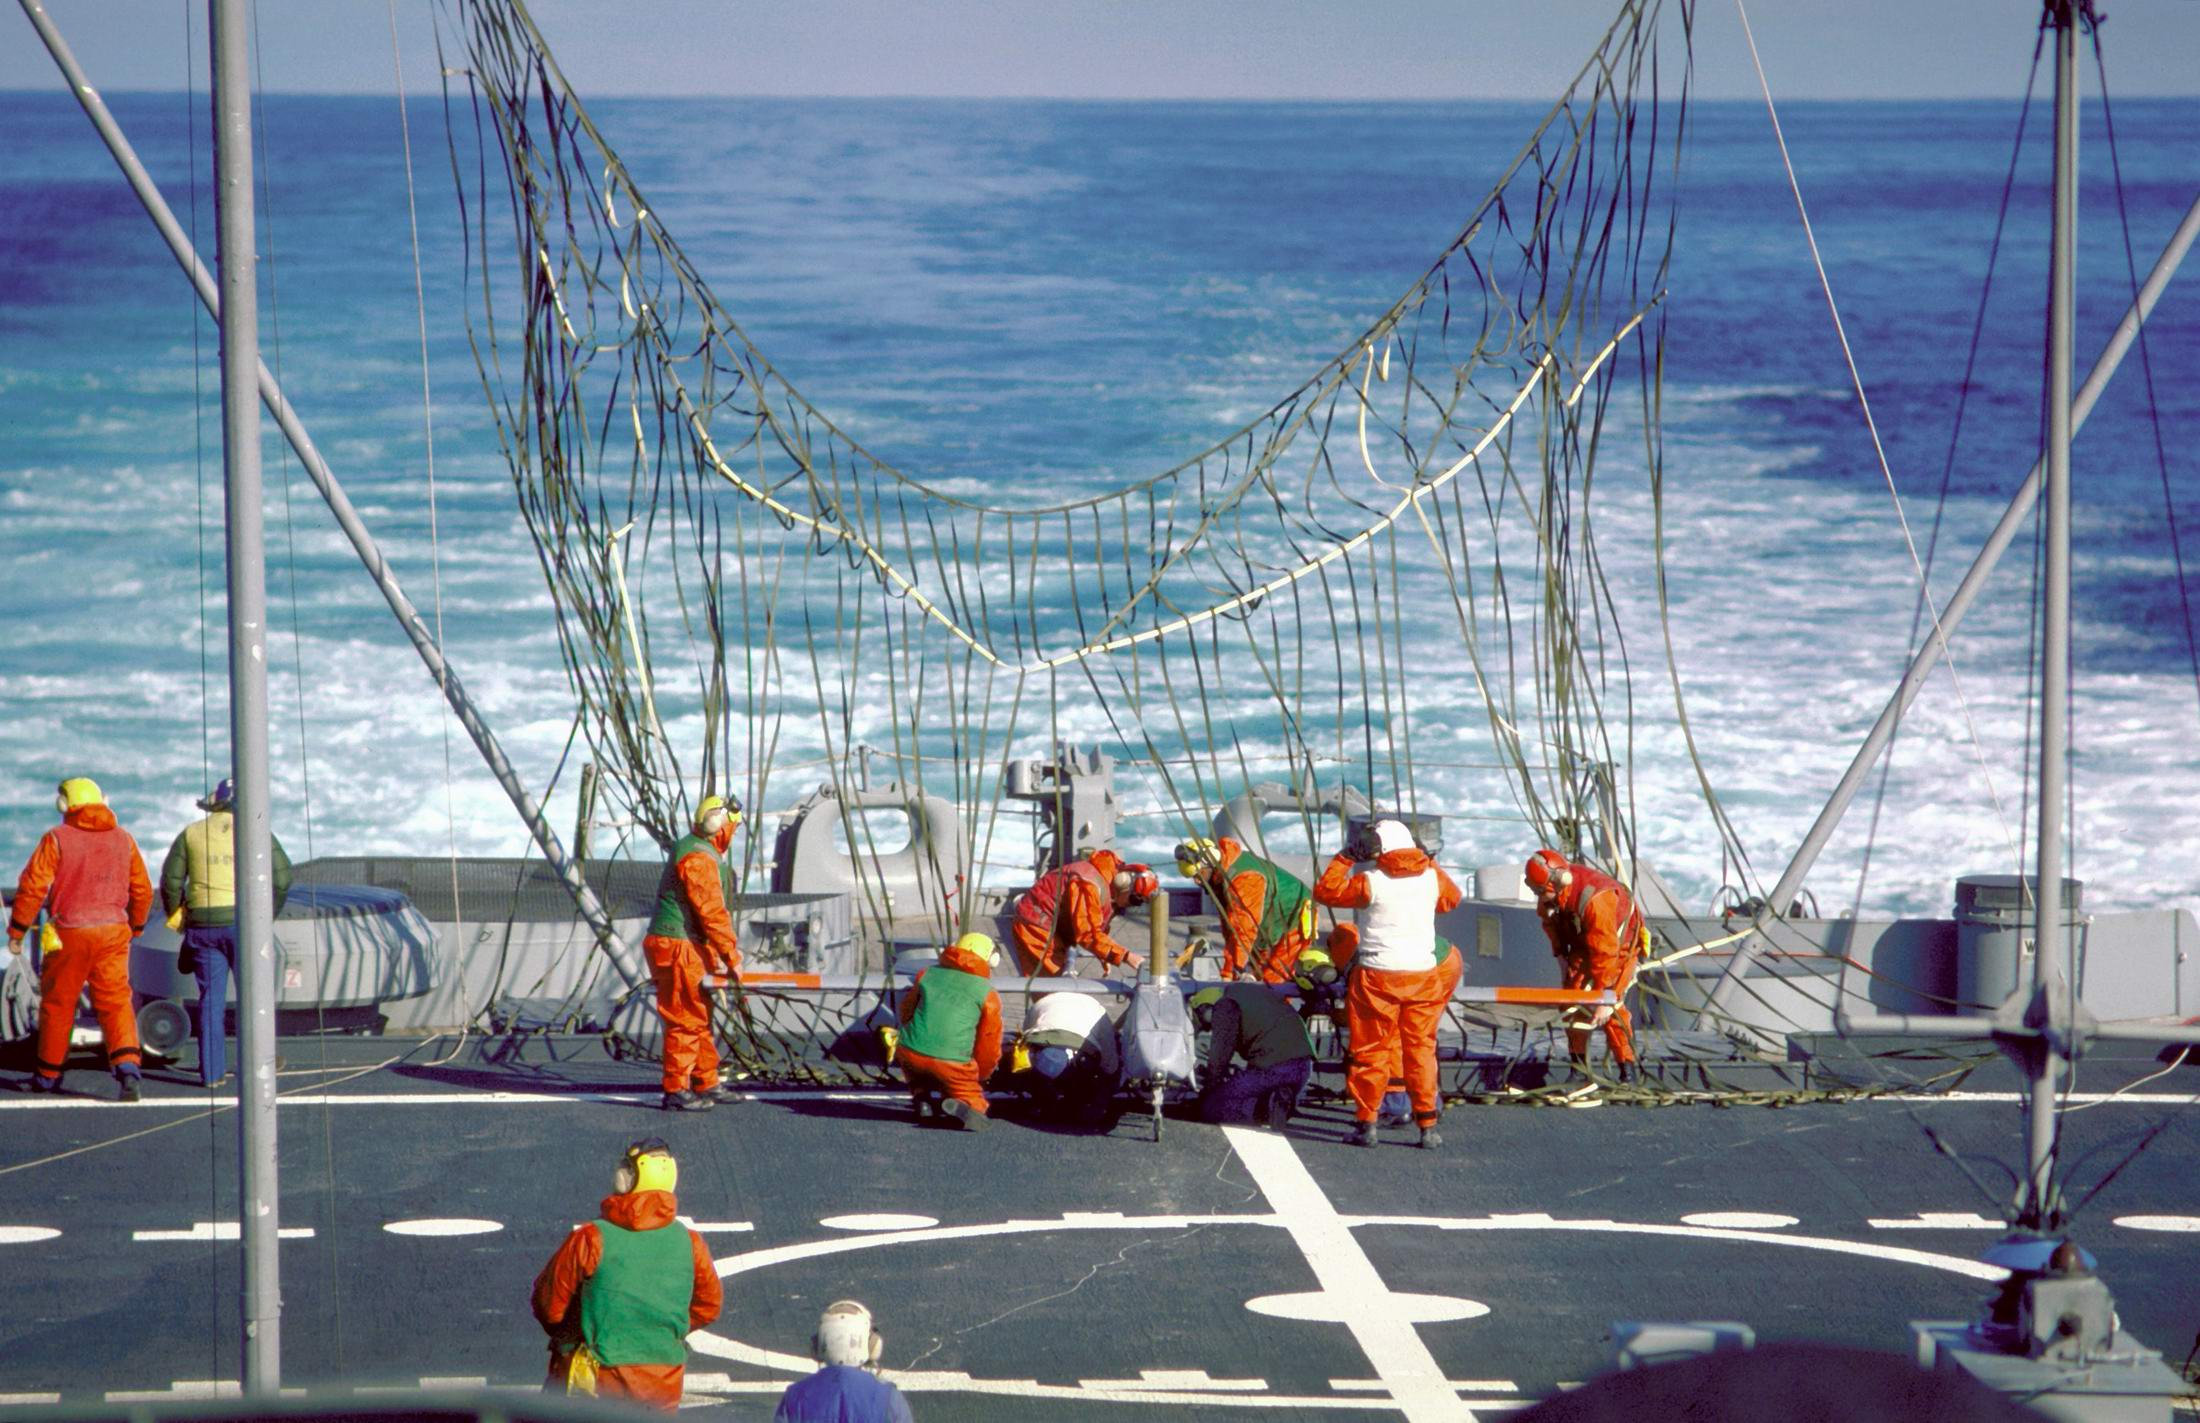 Crewmen disengage a Pioneer I remotely-piloted vehicle (RPV) from a recovery net erected on the stern of the battleship USS IOWA (BB-61).jpg